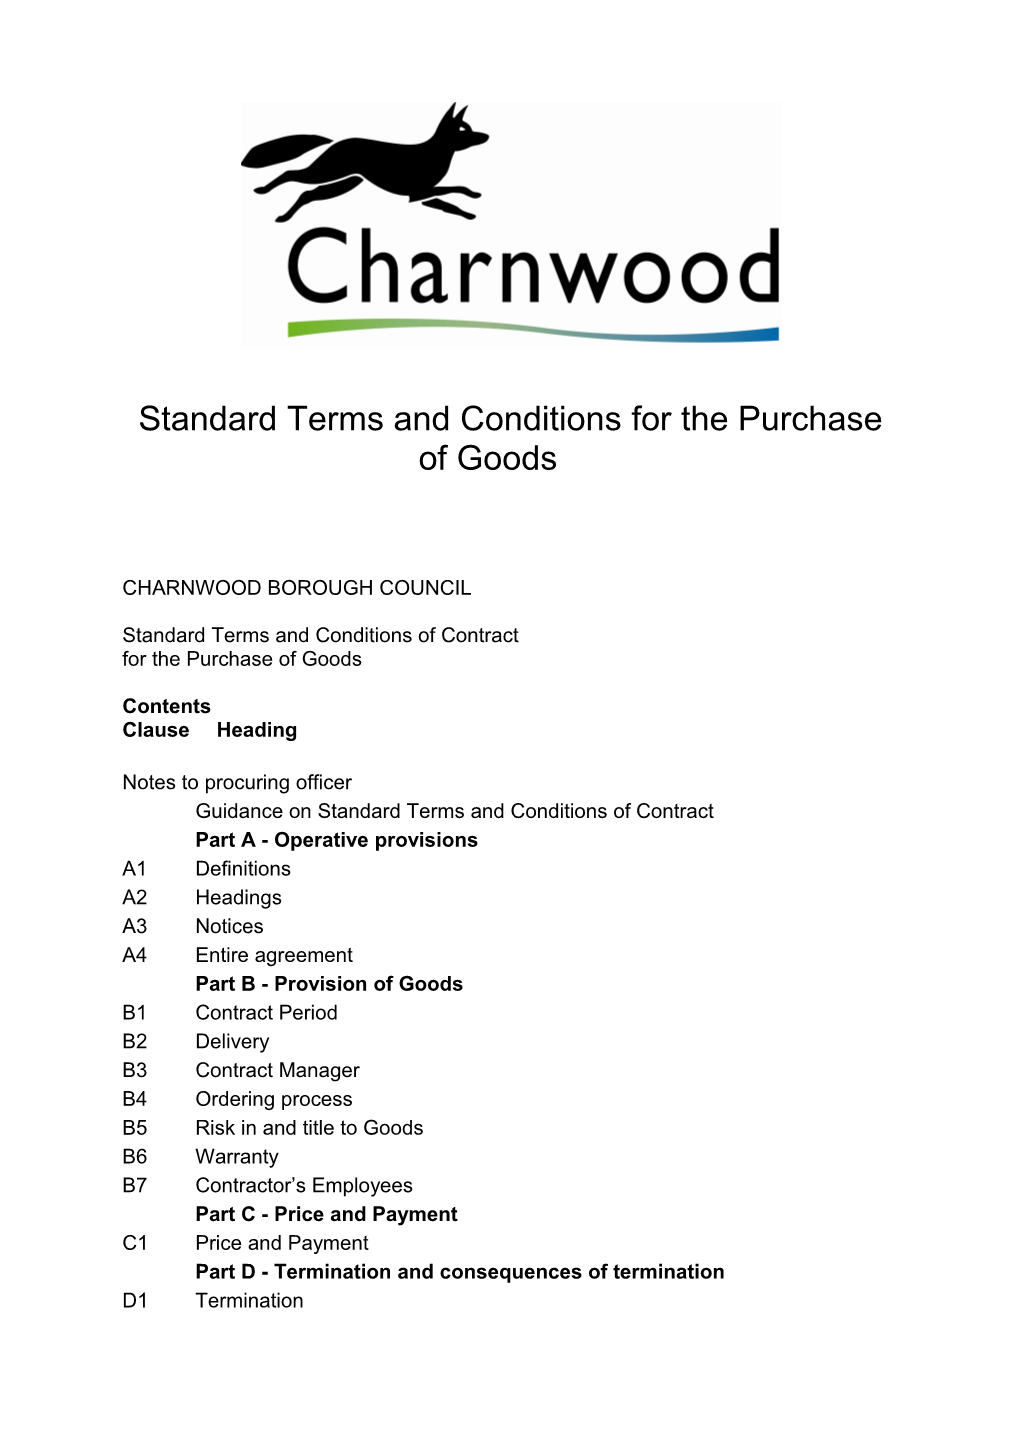 Standard Terms and Conditions for the Purchase of Goods